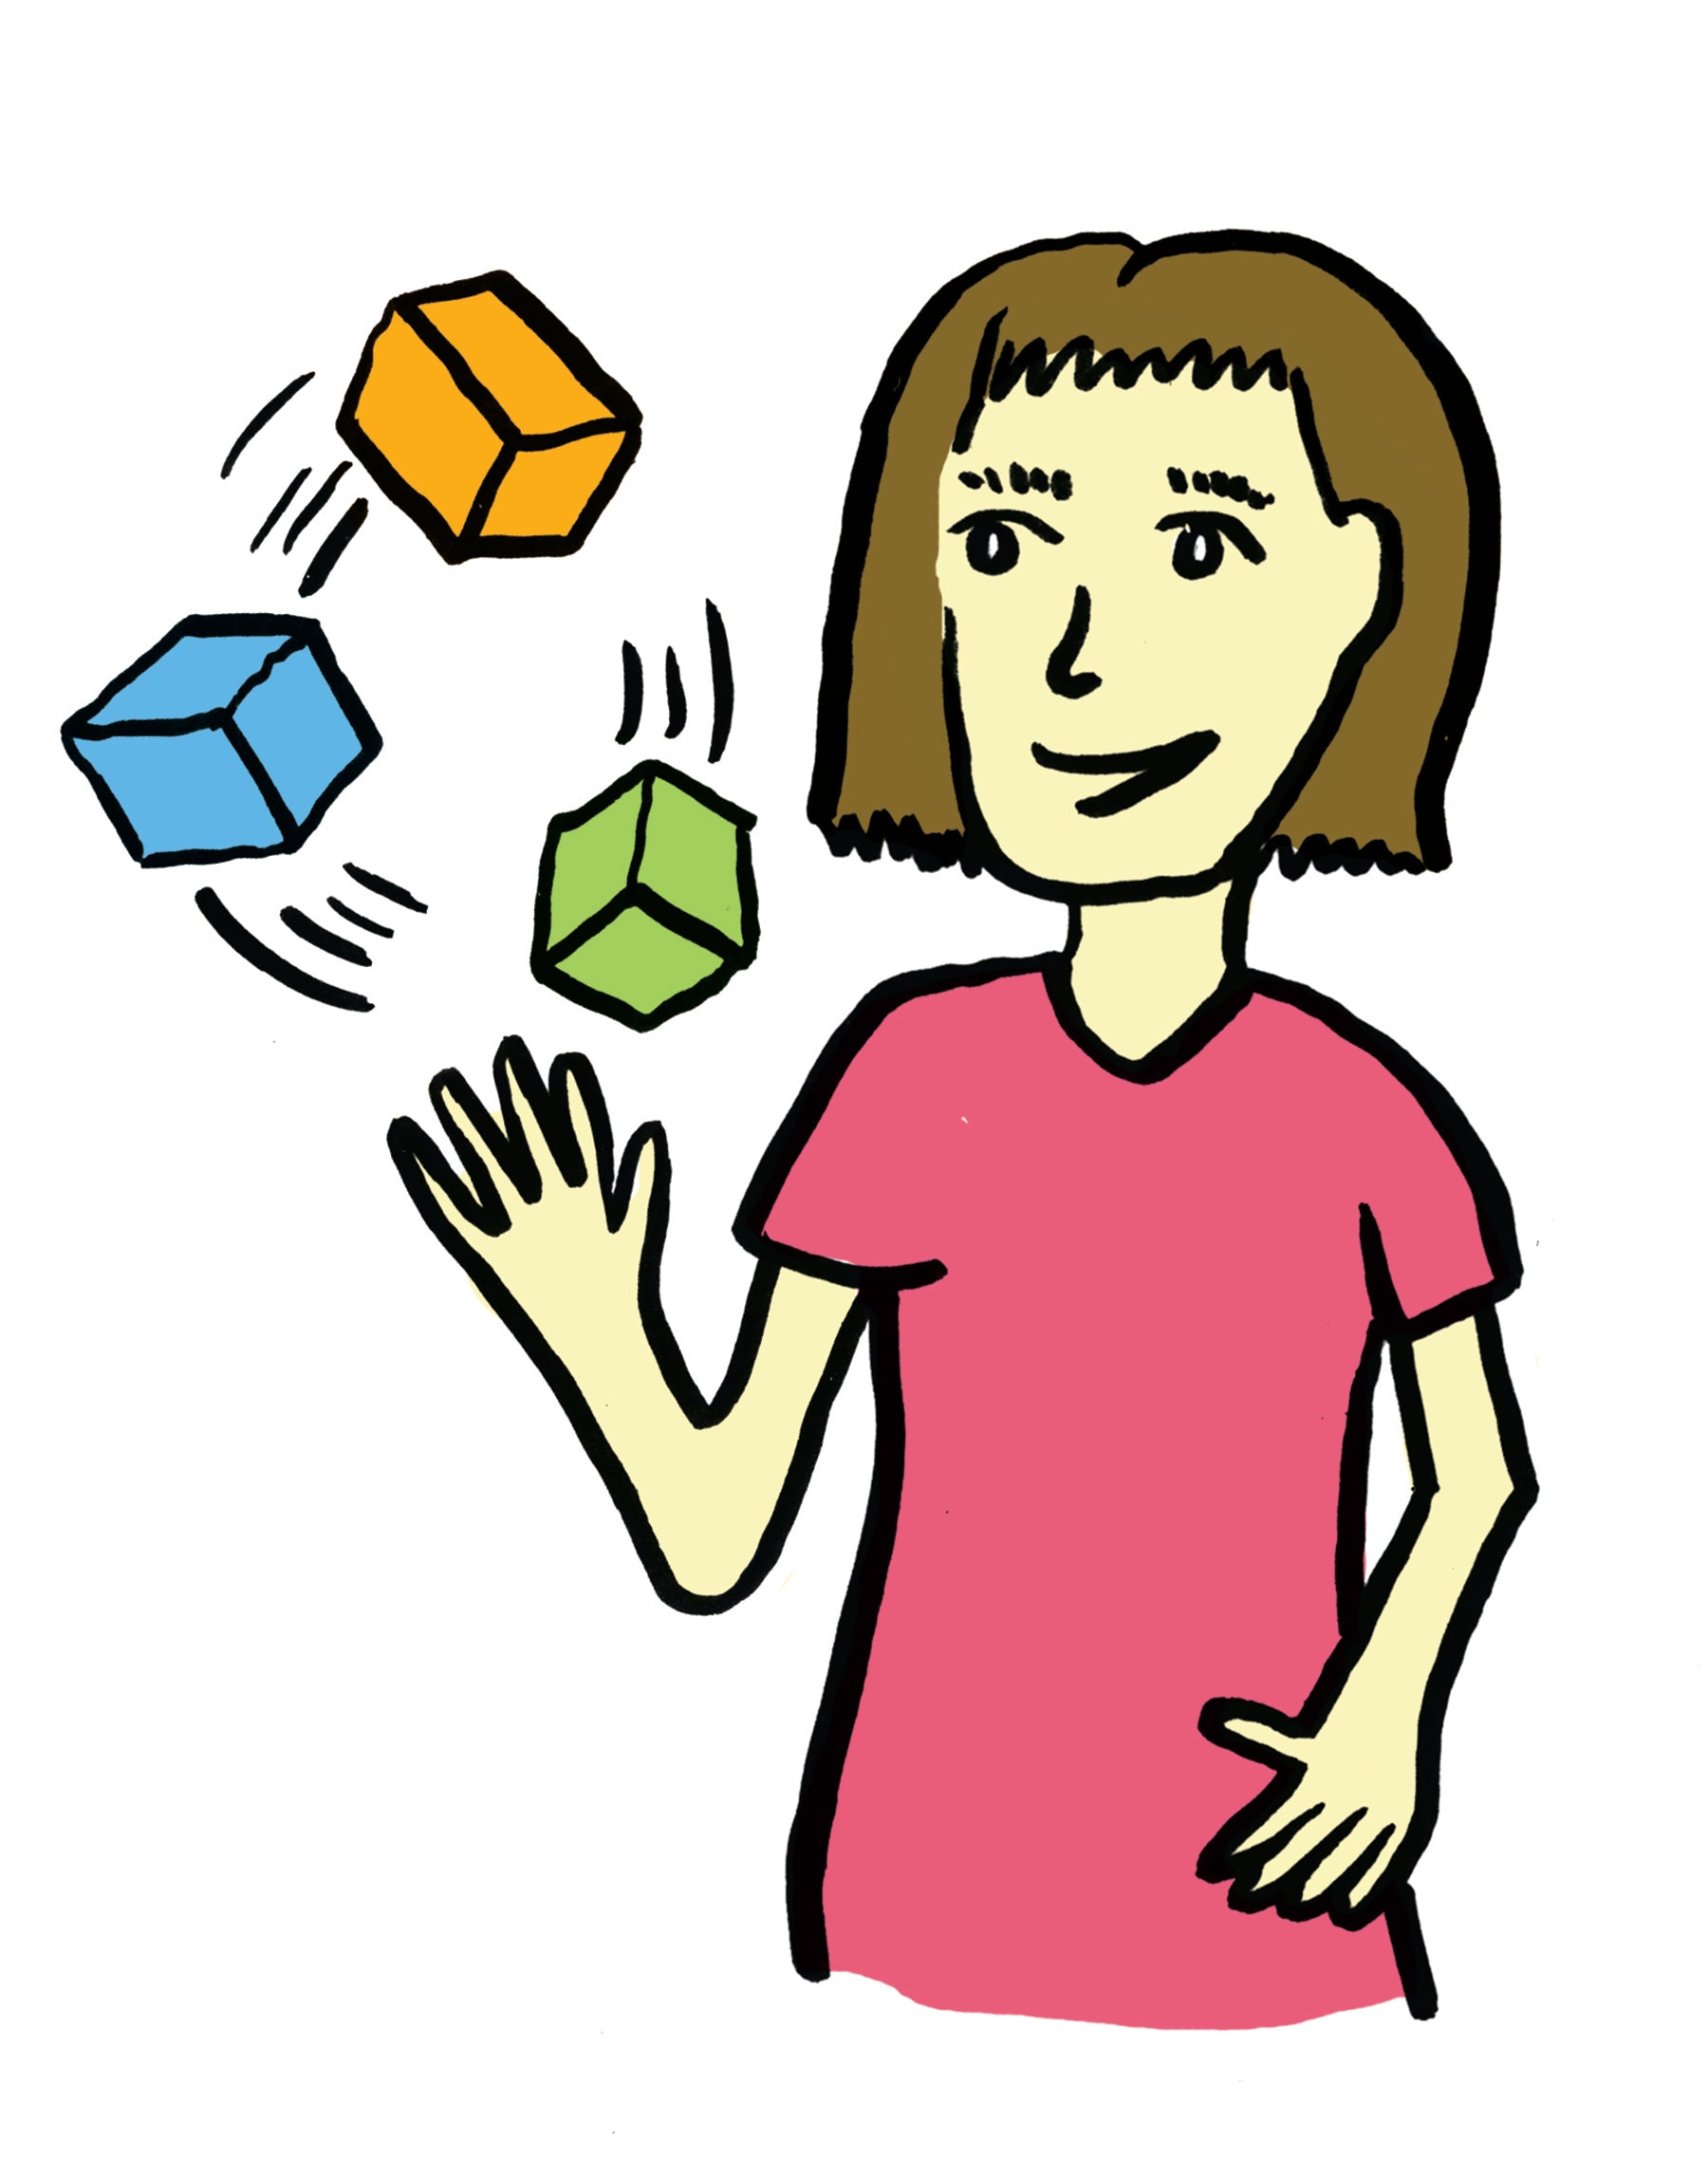 A woman juggling cubes with one hand as a metaphor for getting started in your career. 